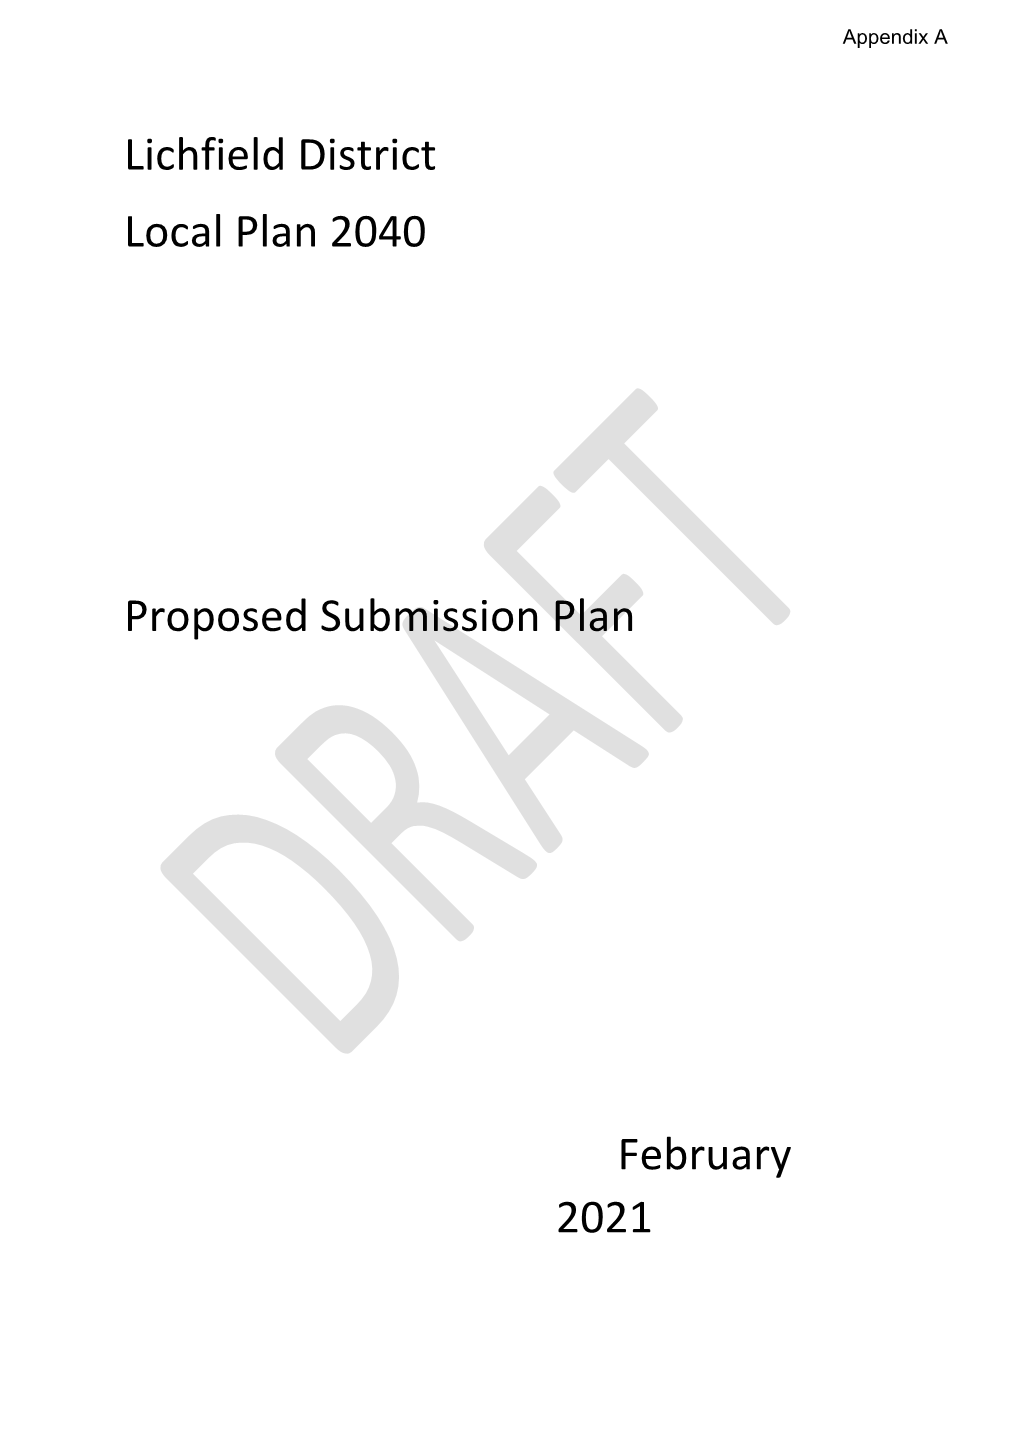 Lichfield District Local Plan 2040 Proposed Submission Plan